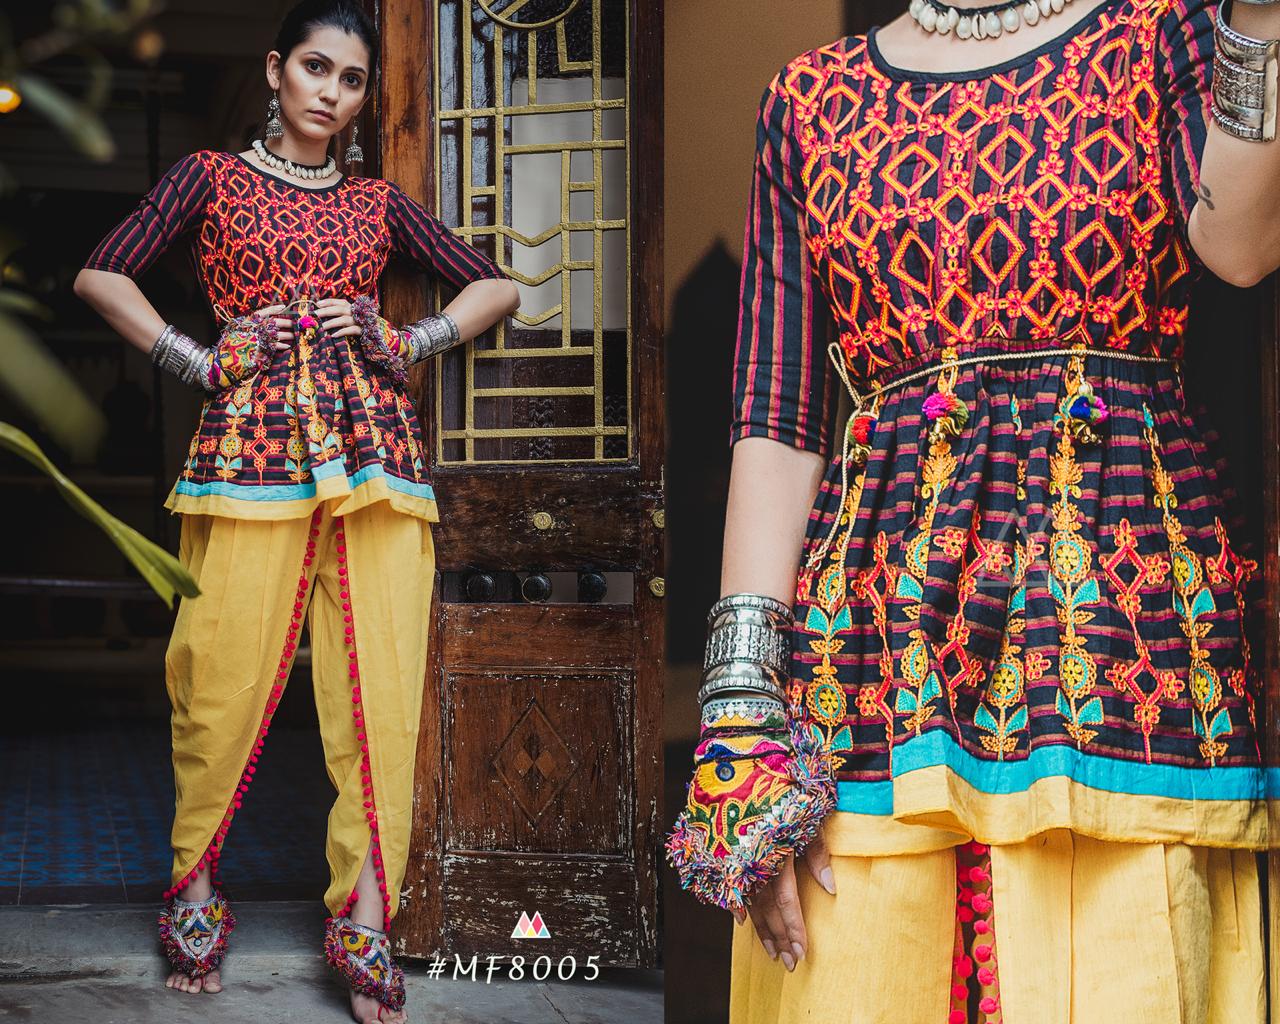 Mesmora launch dholida a female kedia collection amazing navratri trendy western look flairy kedias and tulip pants concept